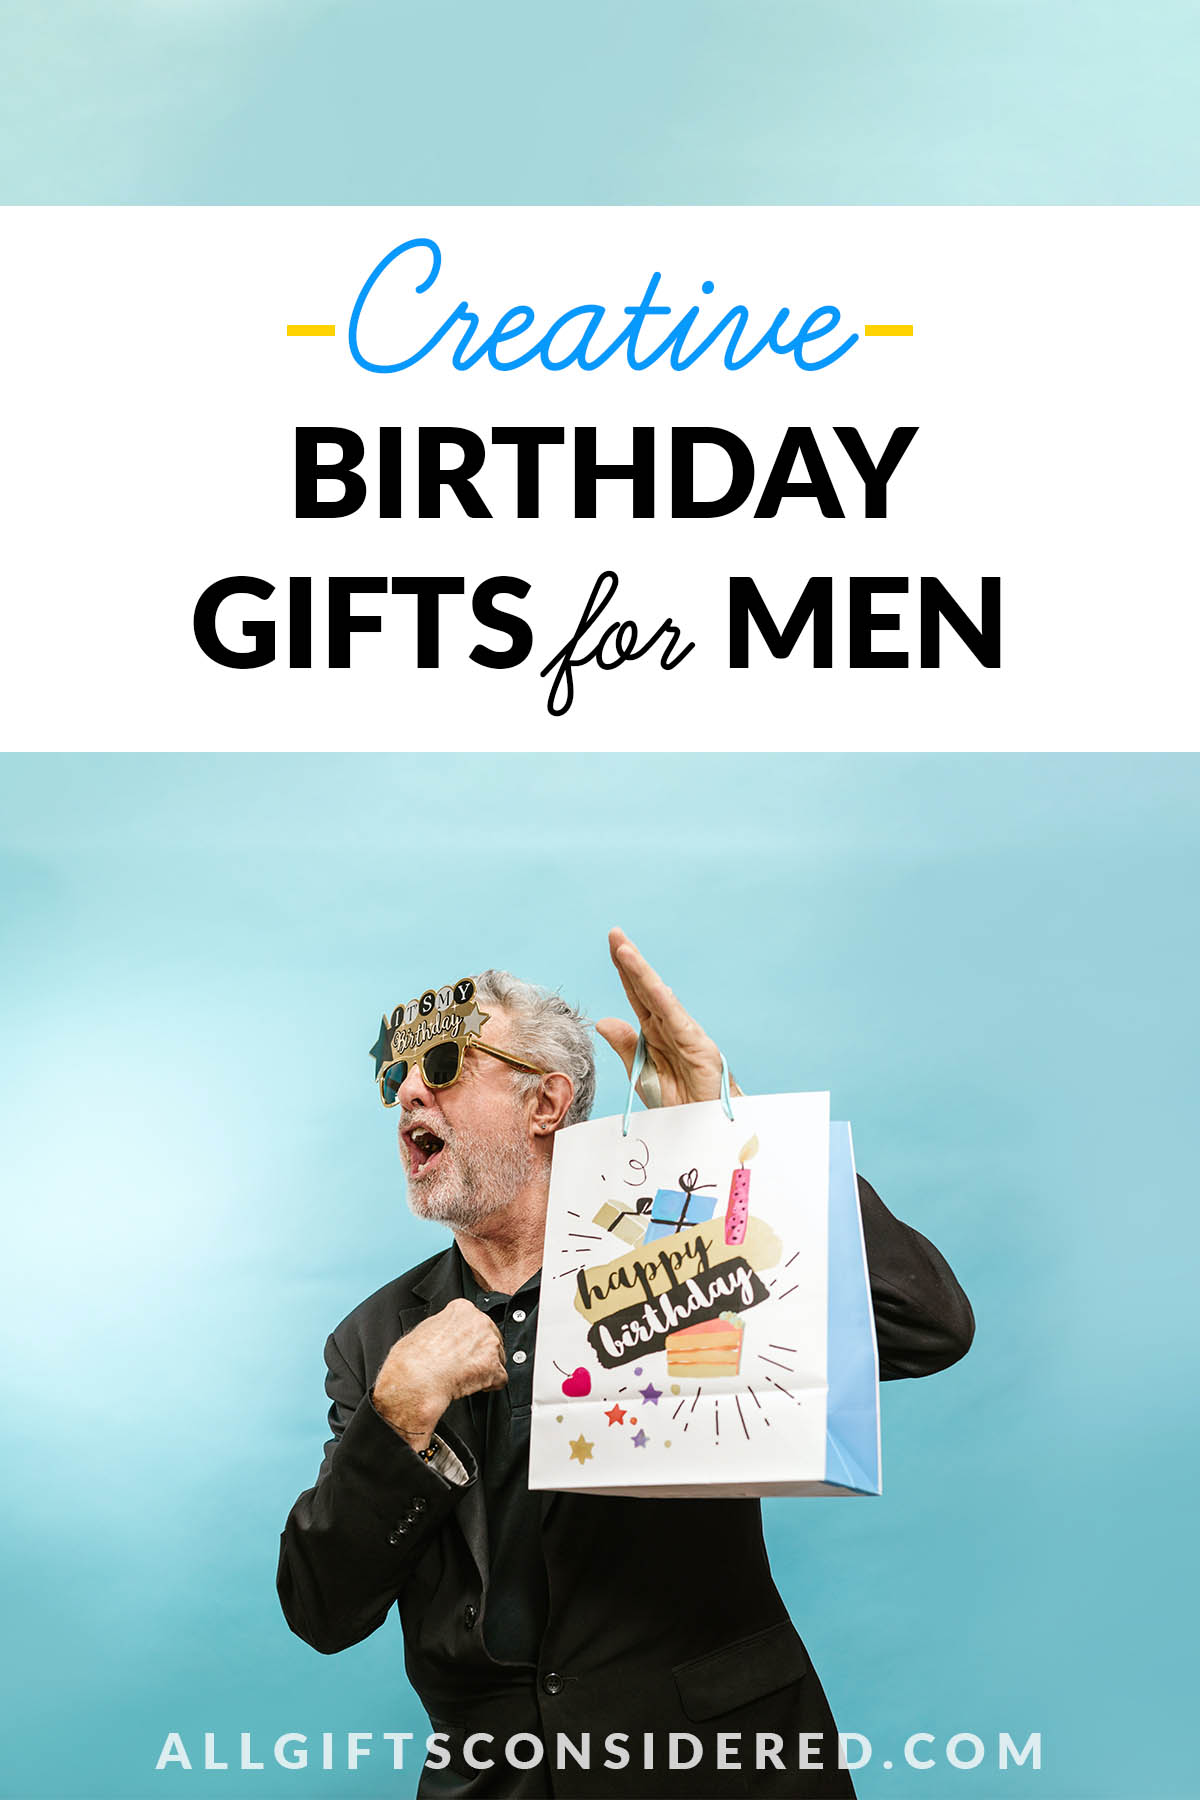 Creative Birthday Gifts for Men